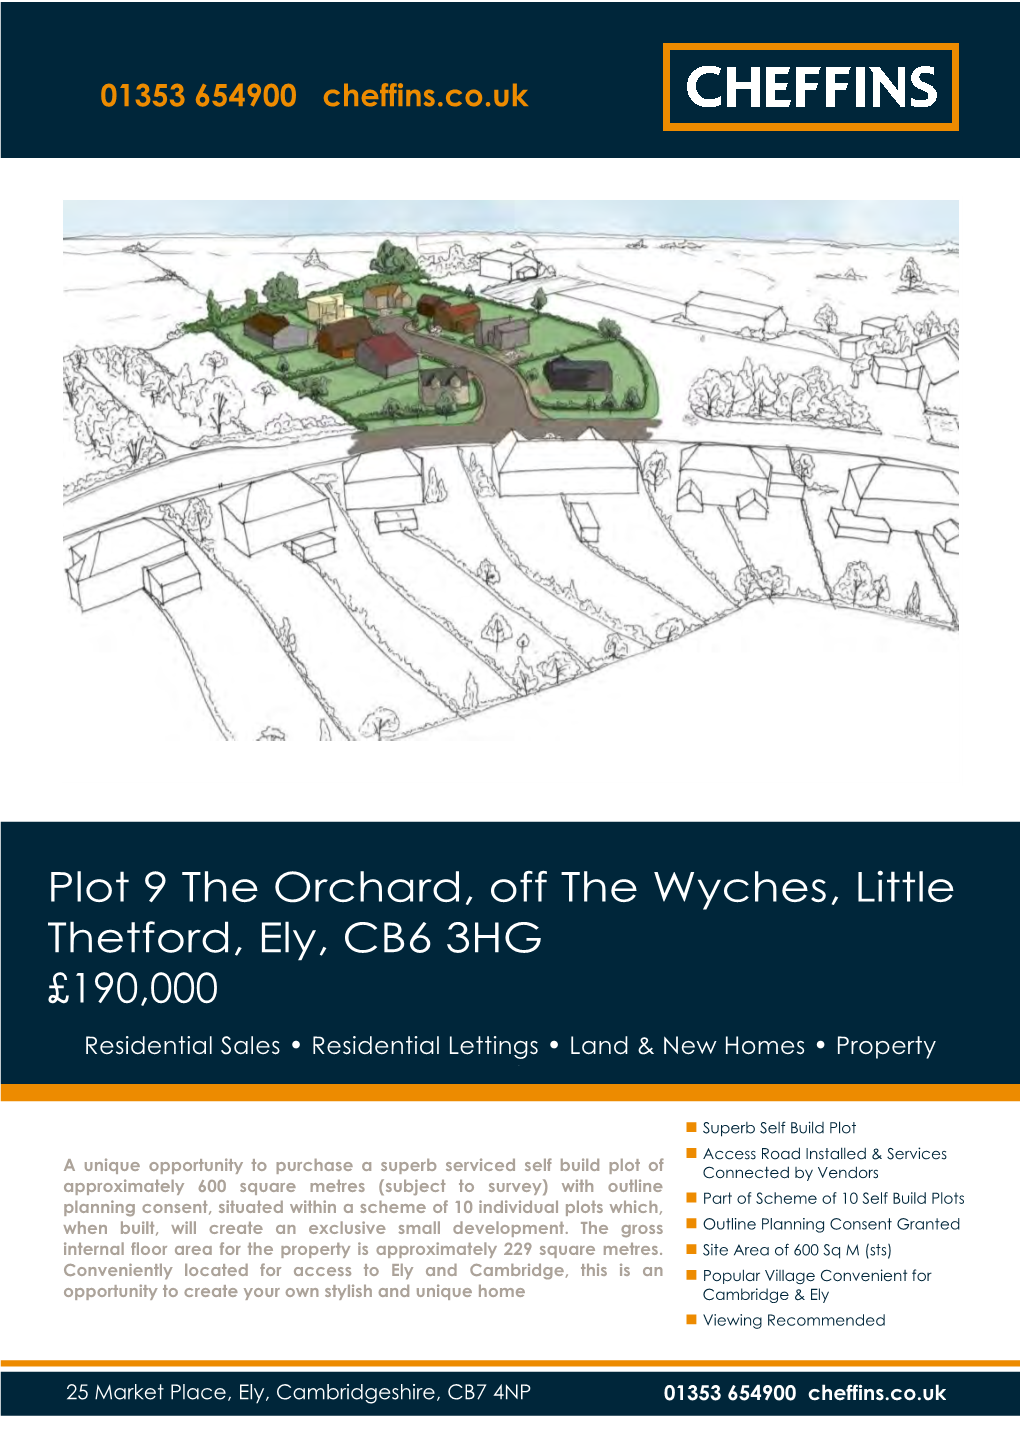 Plot 9 the Orchard, Off the Wyches, Little Thetford, Ely, CB6 3HG £190,000 Residential Sales • Residential Lettings • Land & New Homes • Property Auctions